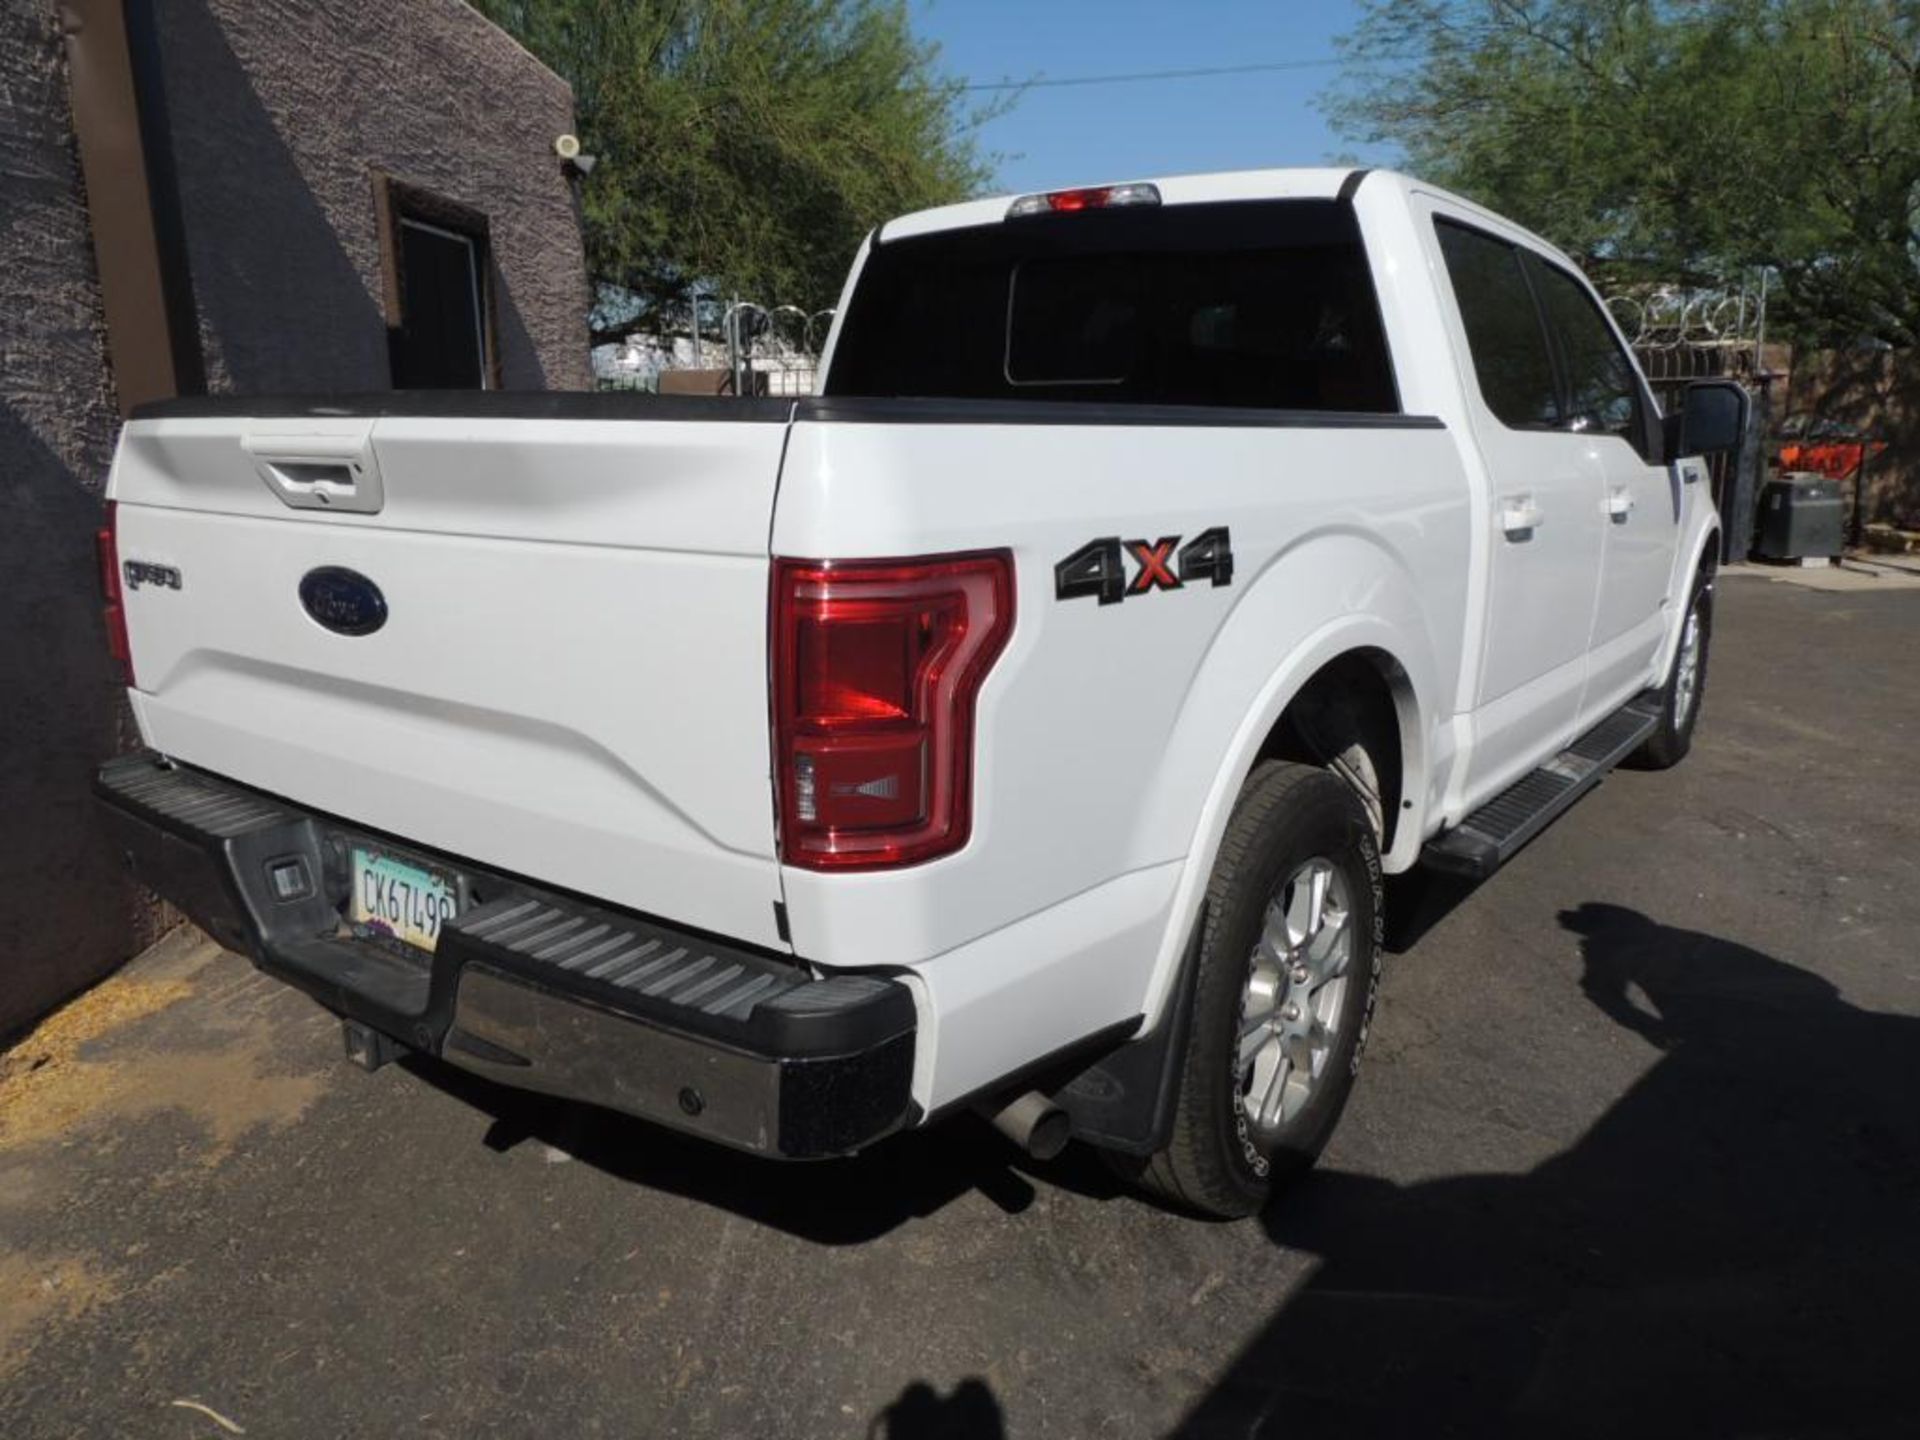 2017 Ford F150 Lariat Crew Cab Shortbed 4x4, VIN # 1FTEW1EG6HKC64162, 3.5 Ecoboost, Auto Trans, 116 - Image 3 of 4